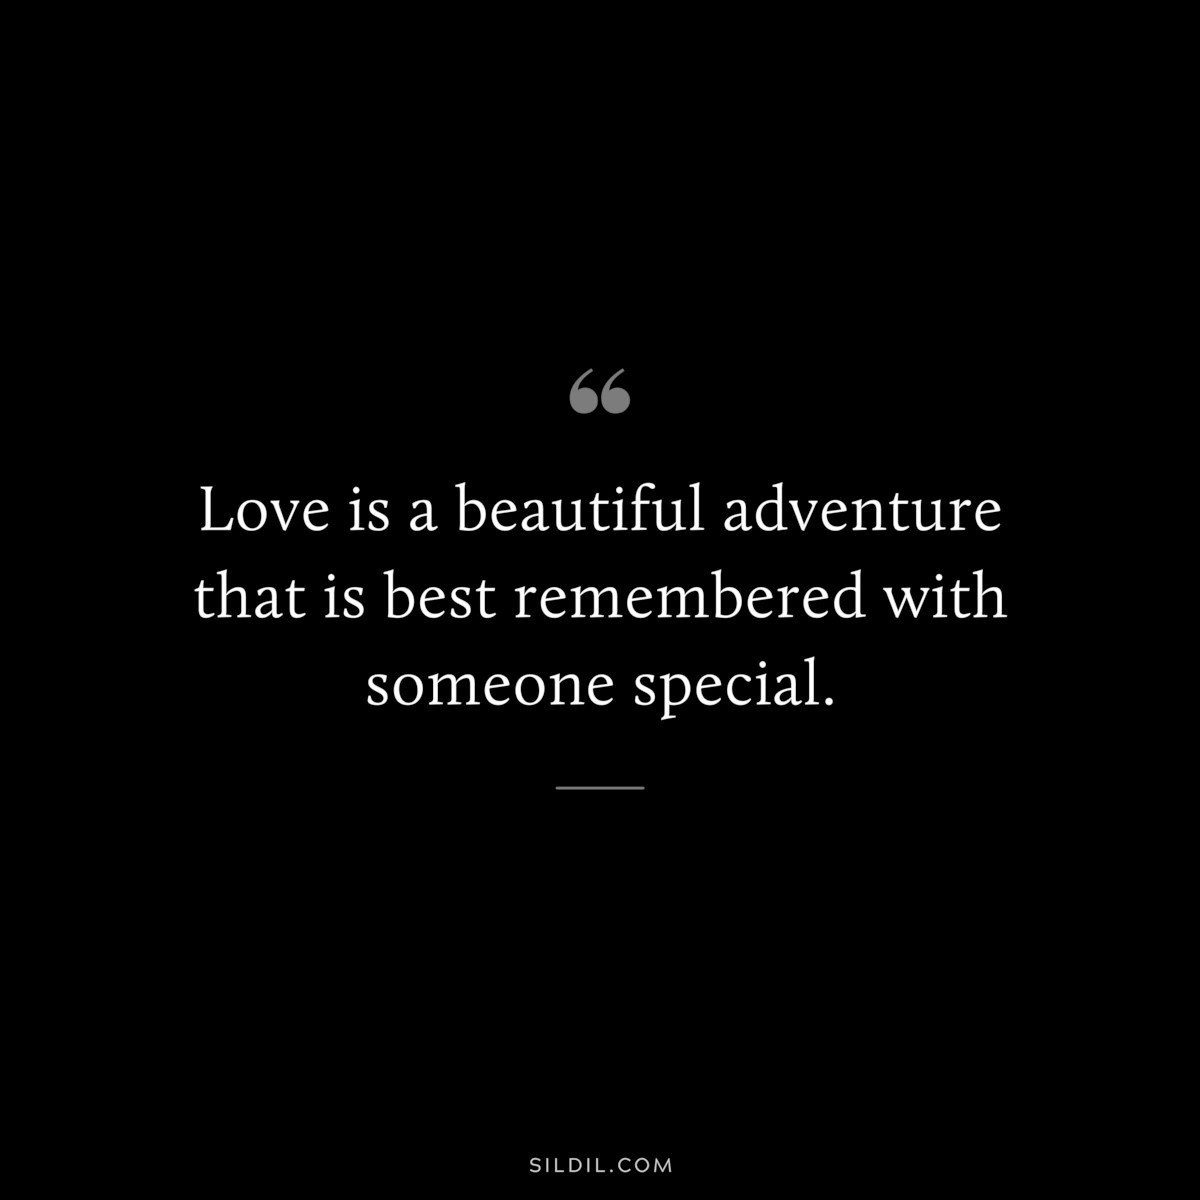 Love is a beautiful adventure that is best remembered with someone special.